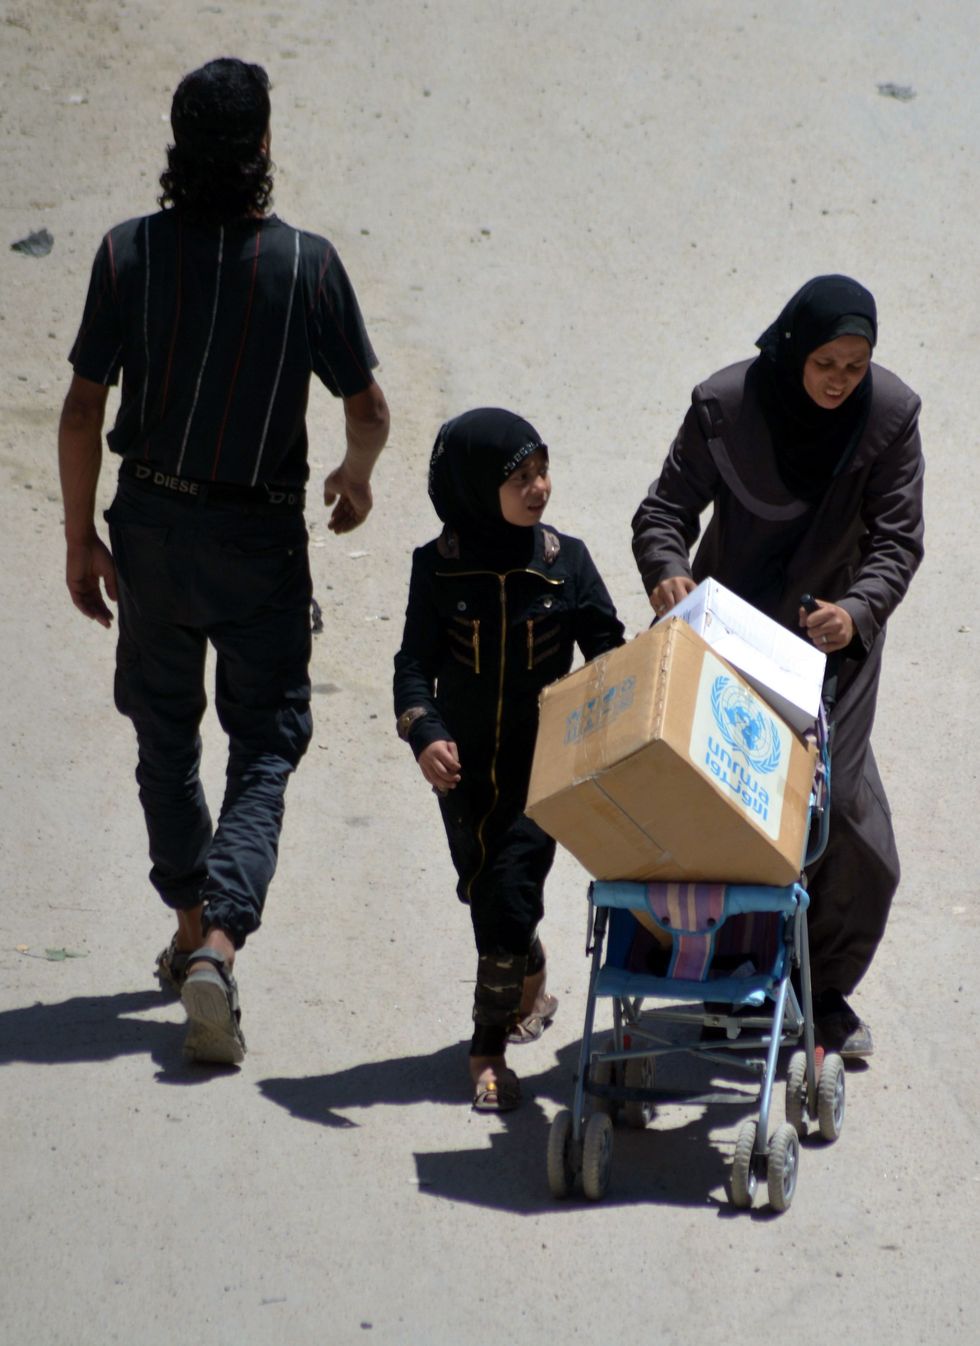 A woman uses a pram to transport a food aid parcel from UNWRA in the district of Yarmuk in southern Damascus on May 12, 2016, after they managed to access the camp to distribute aid to some 6,000 remaining residents. Before the war, some 160,000 mostly Palestinians and Syrians lived in the district of Yarmuk in southern Damascus. More than 20 percent of Syria's Palestinian refugees have fled the country and its five-year war, the head of the UN Palestinian refugee agency said. / AFP / rami al-sayed (Photo credit should read RAMI AL-SAYED/AFP/Getty Images)